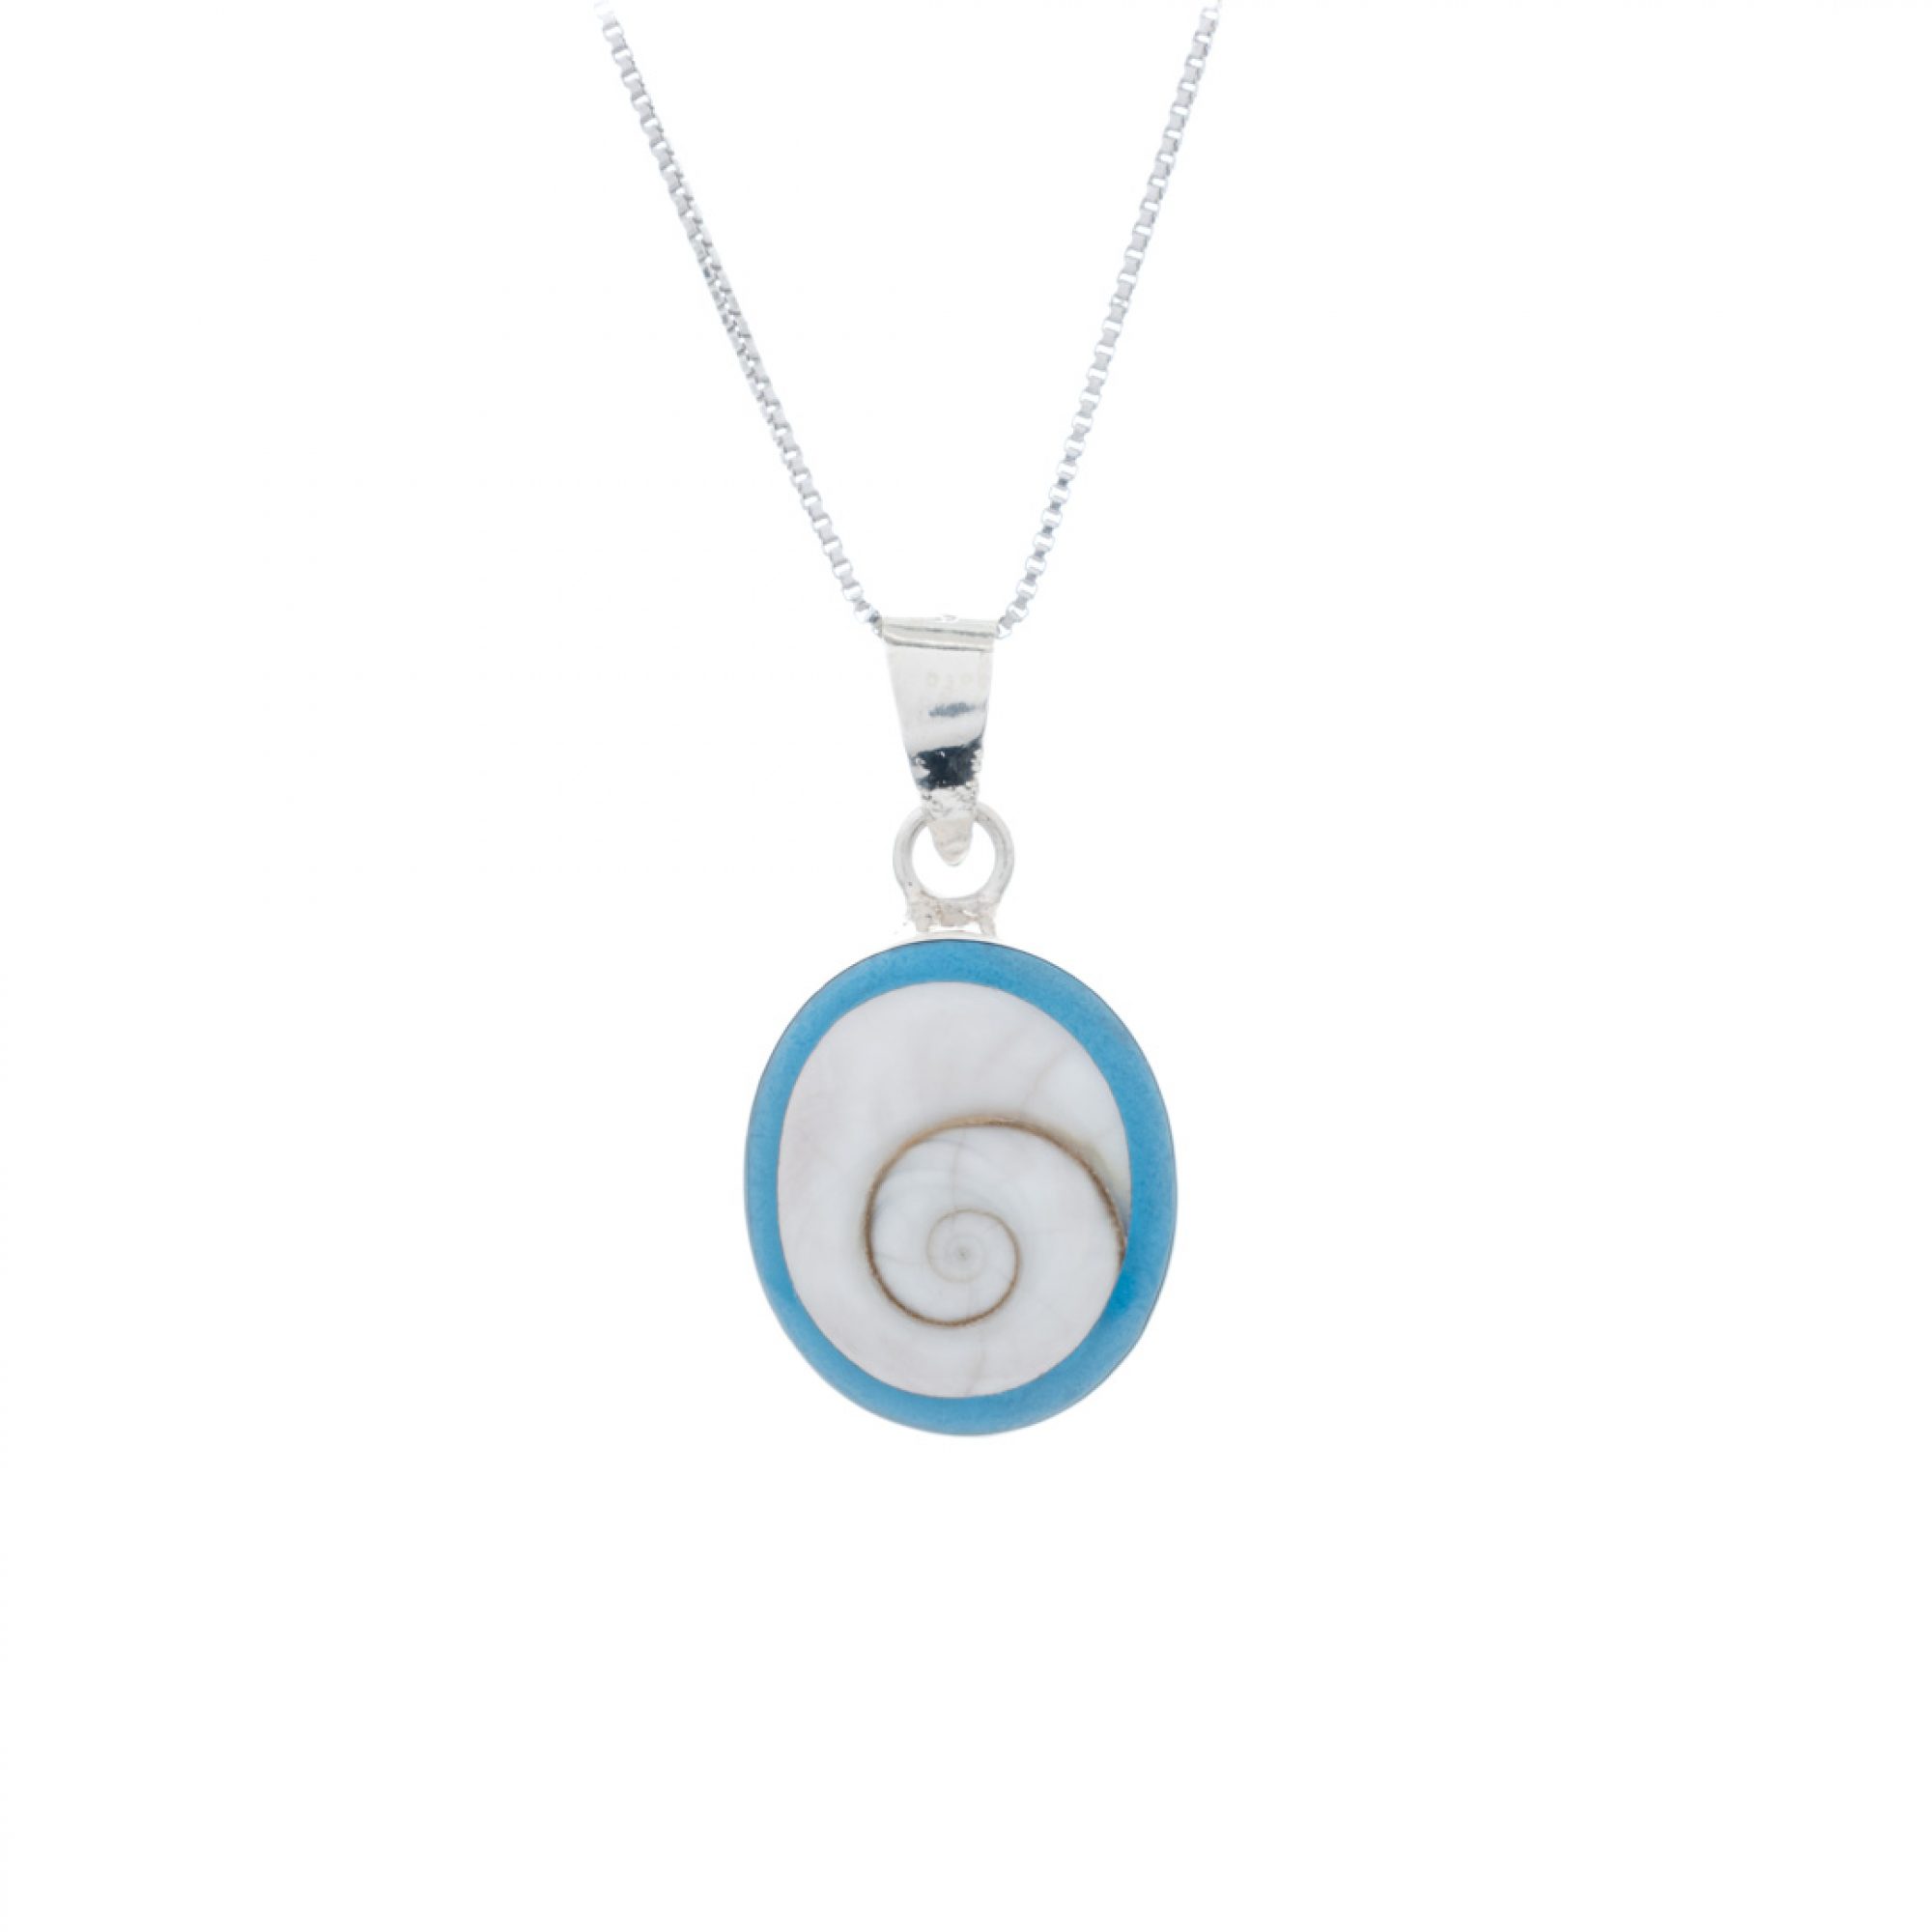 Eye of the sea necklace with turquoise stone